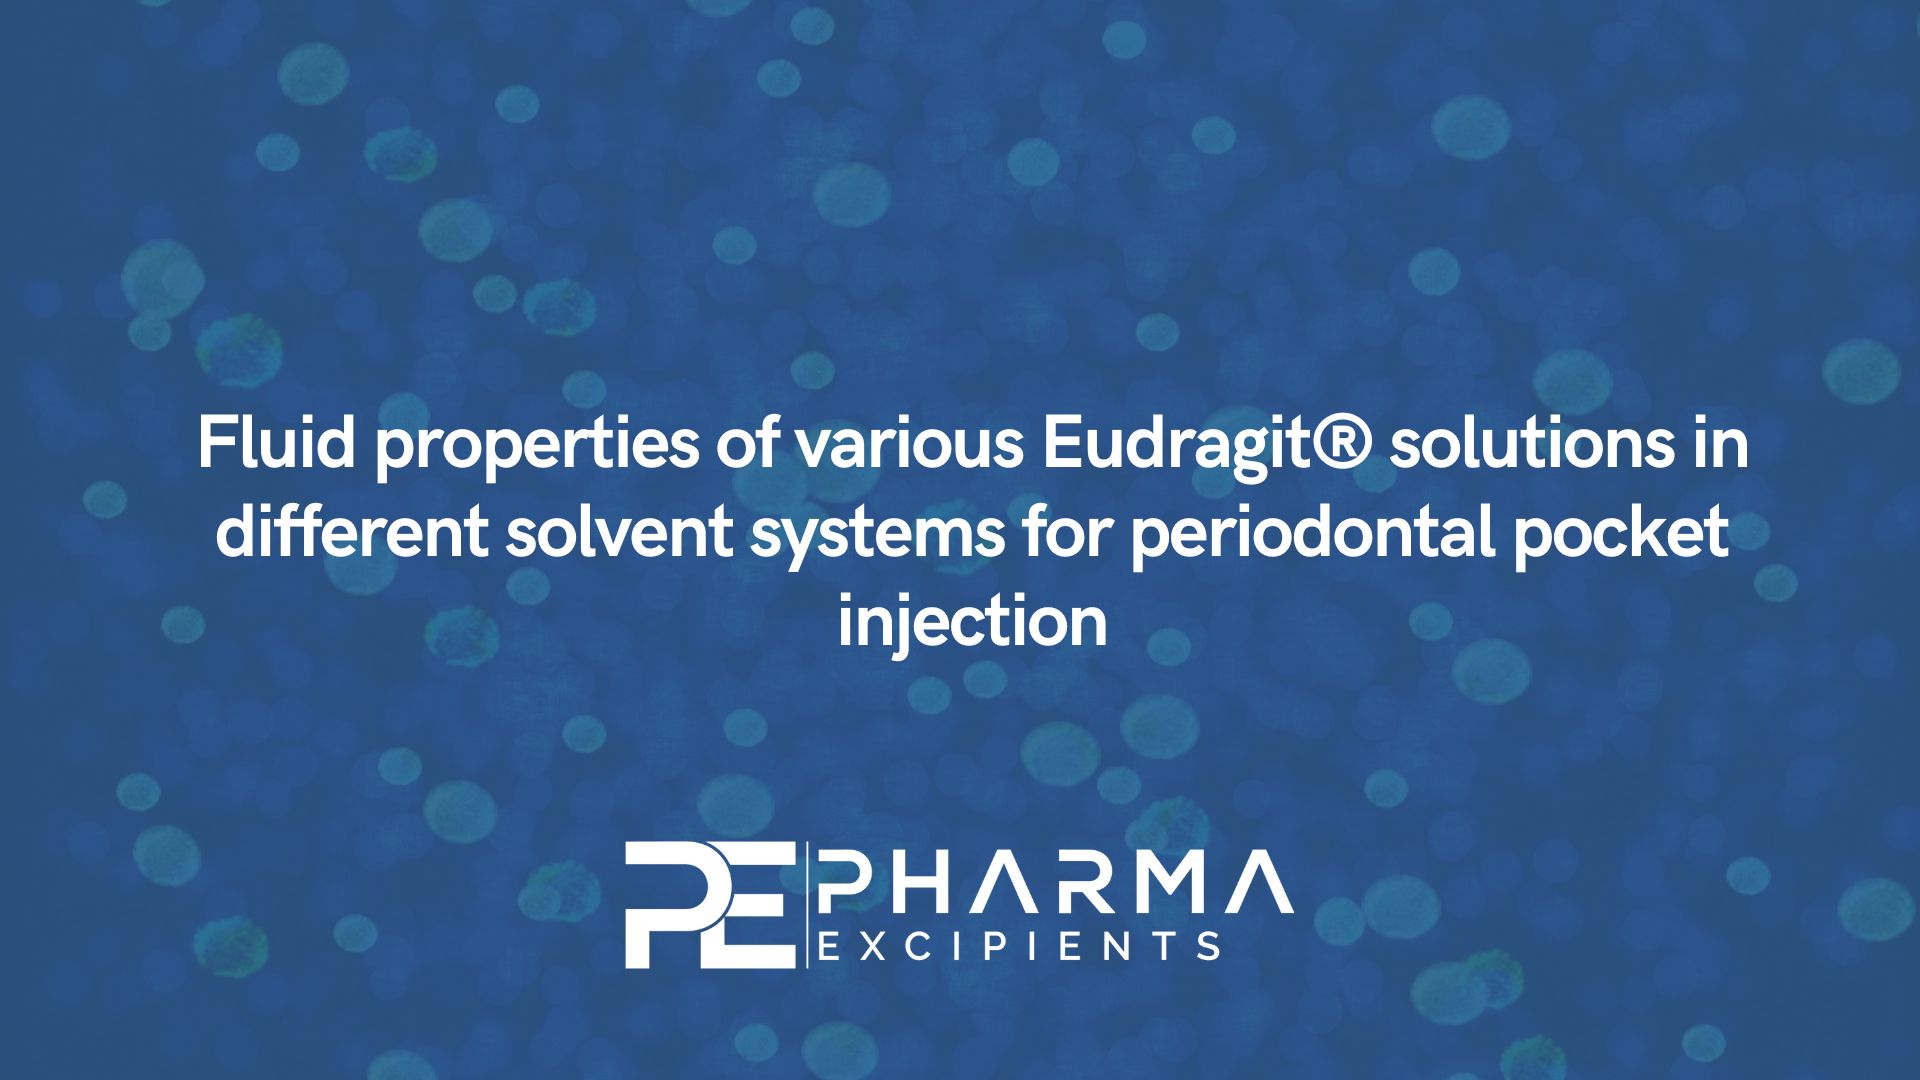 Fluid properties of various Eudragit® solutions in different solvent systems for periodontal pocket injection